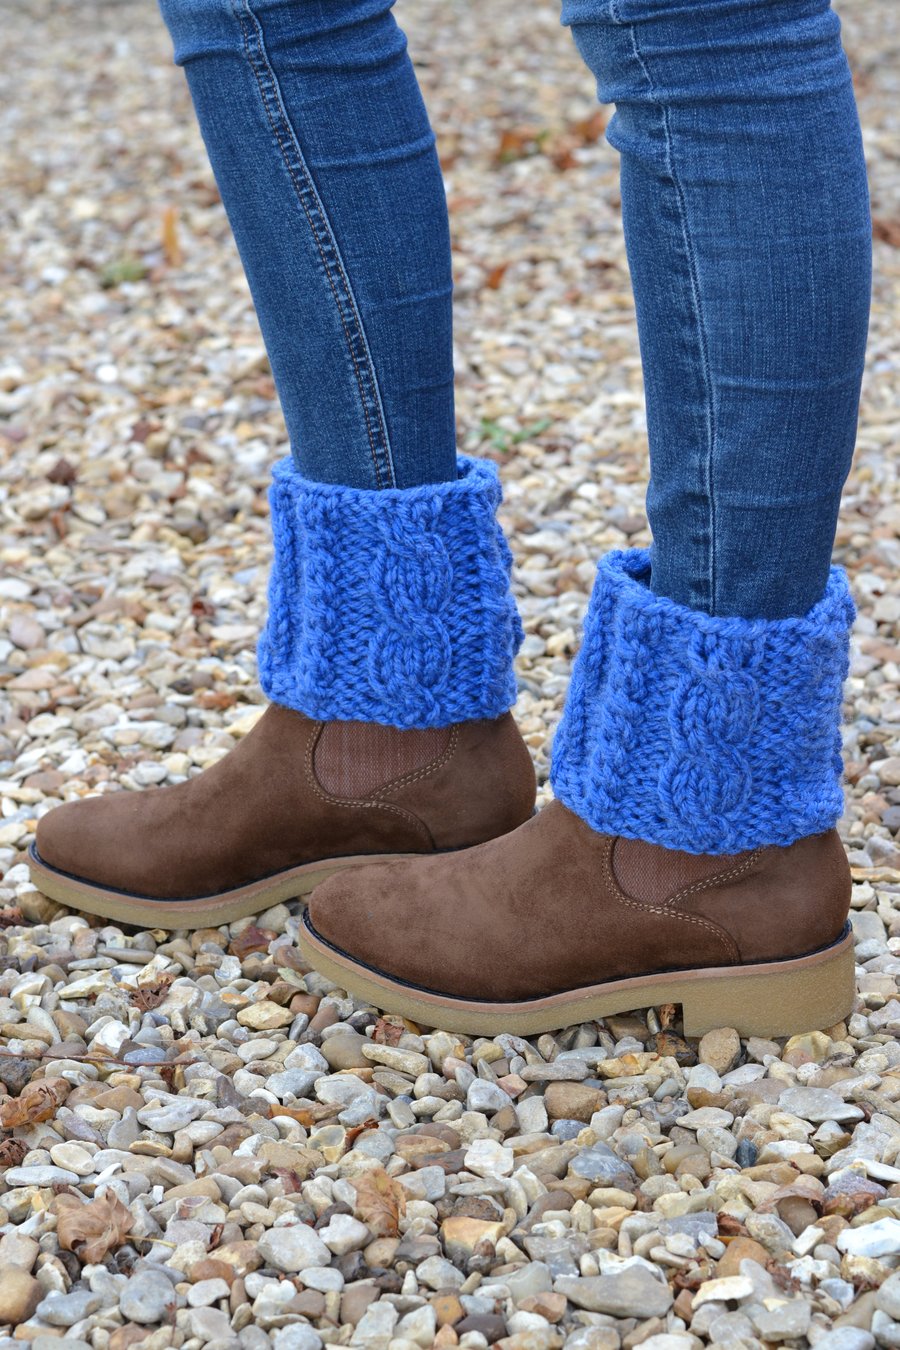 Boot Toppers  Super Chunky  Knitted Boot Cuffs, 